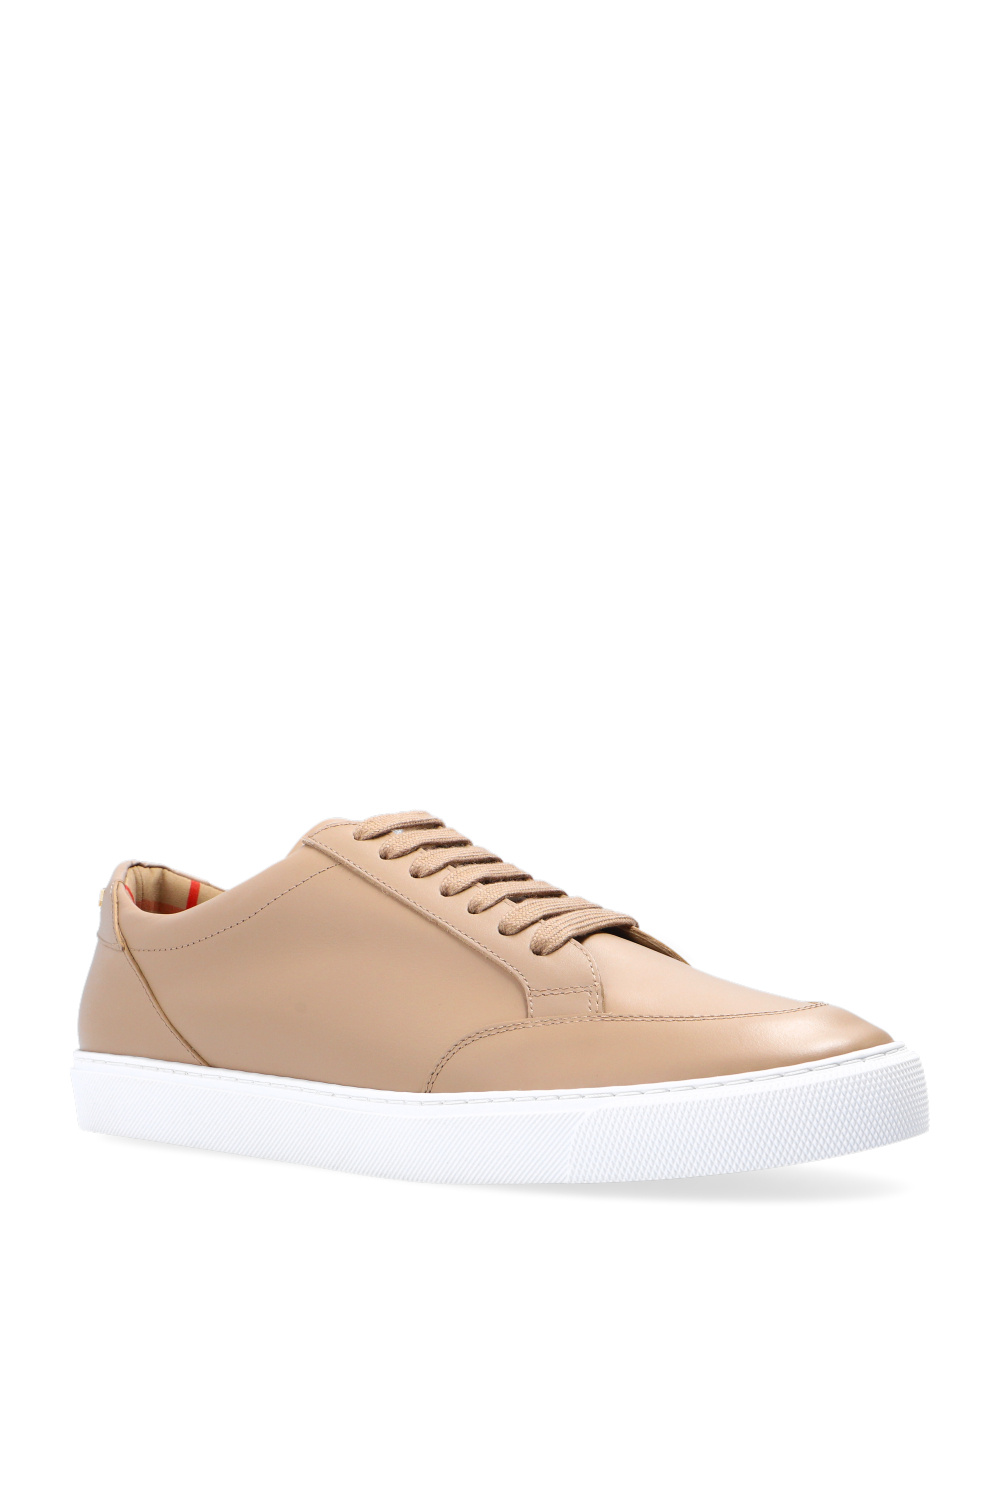 Burberry Leather sneakers